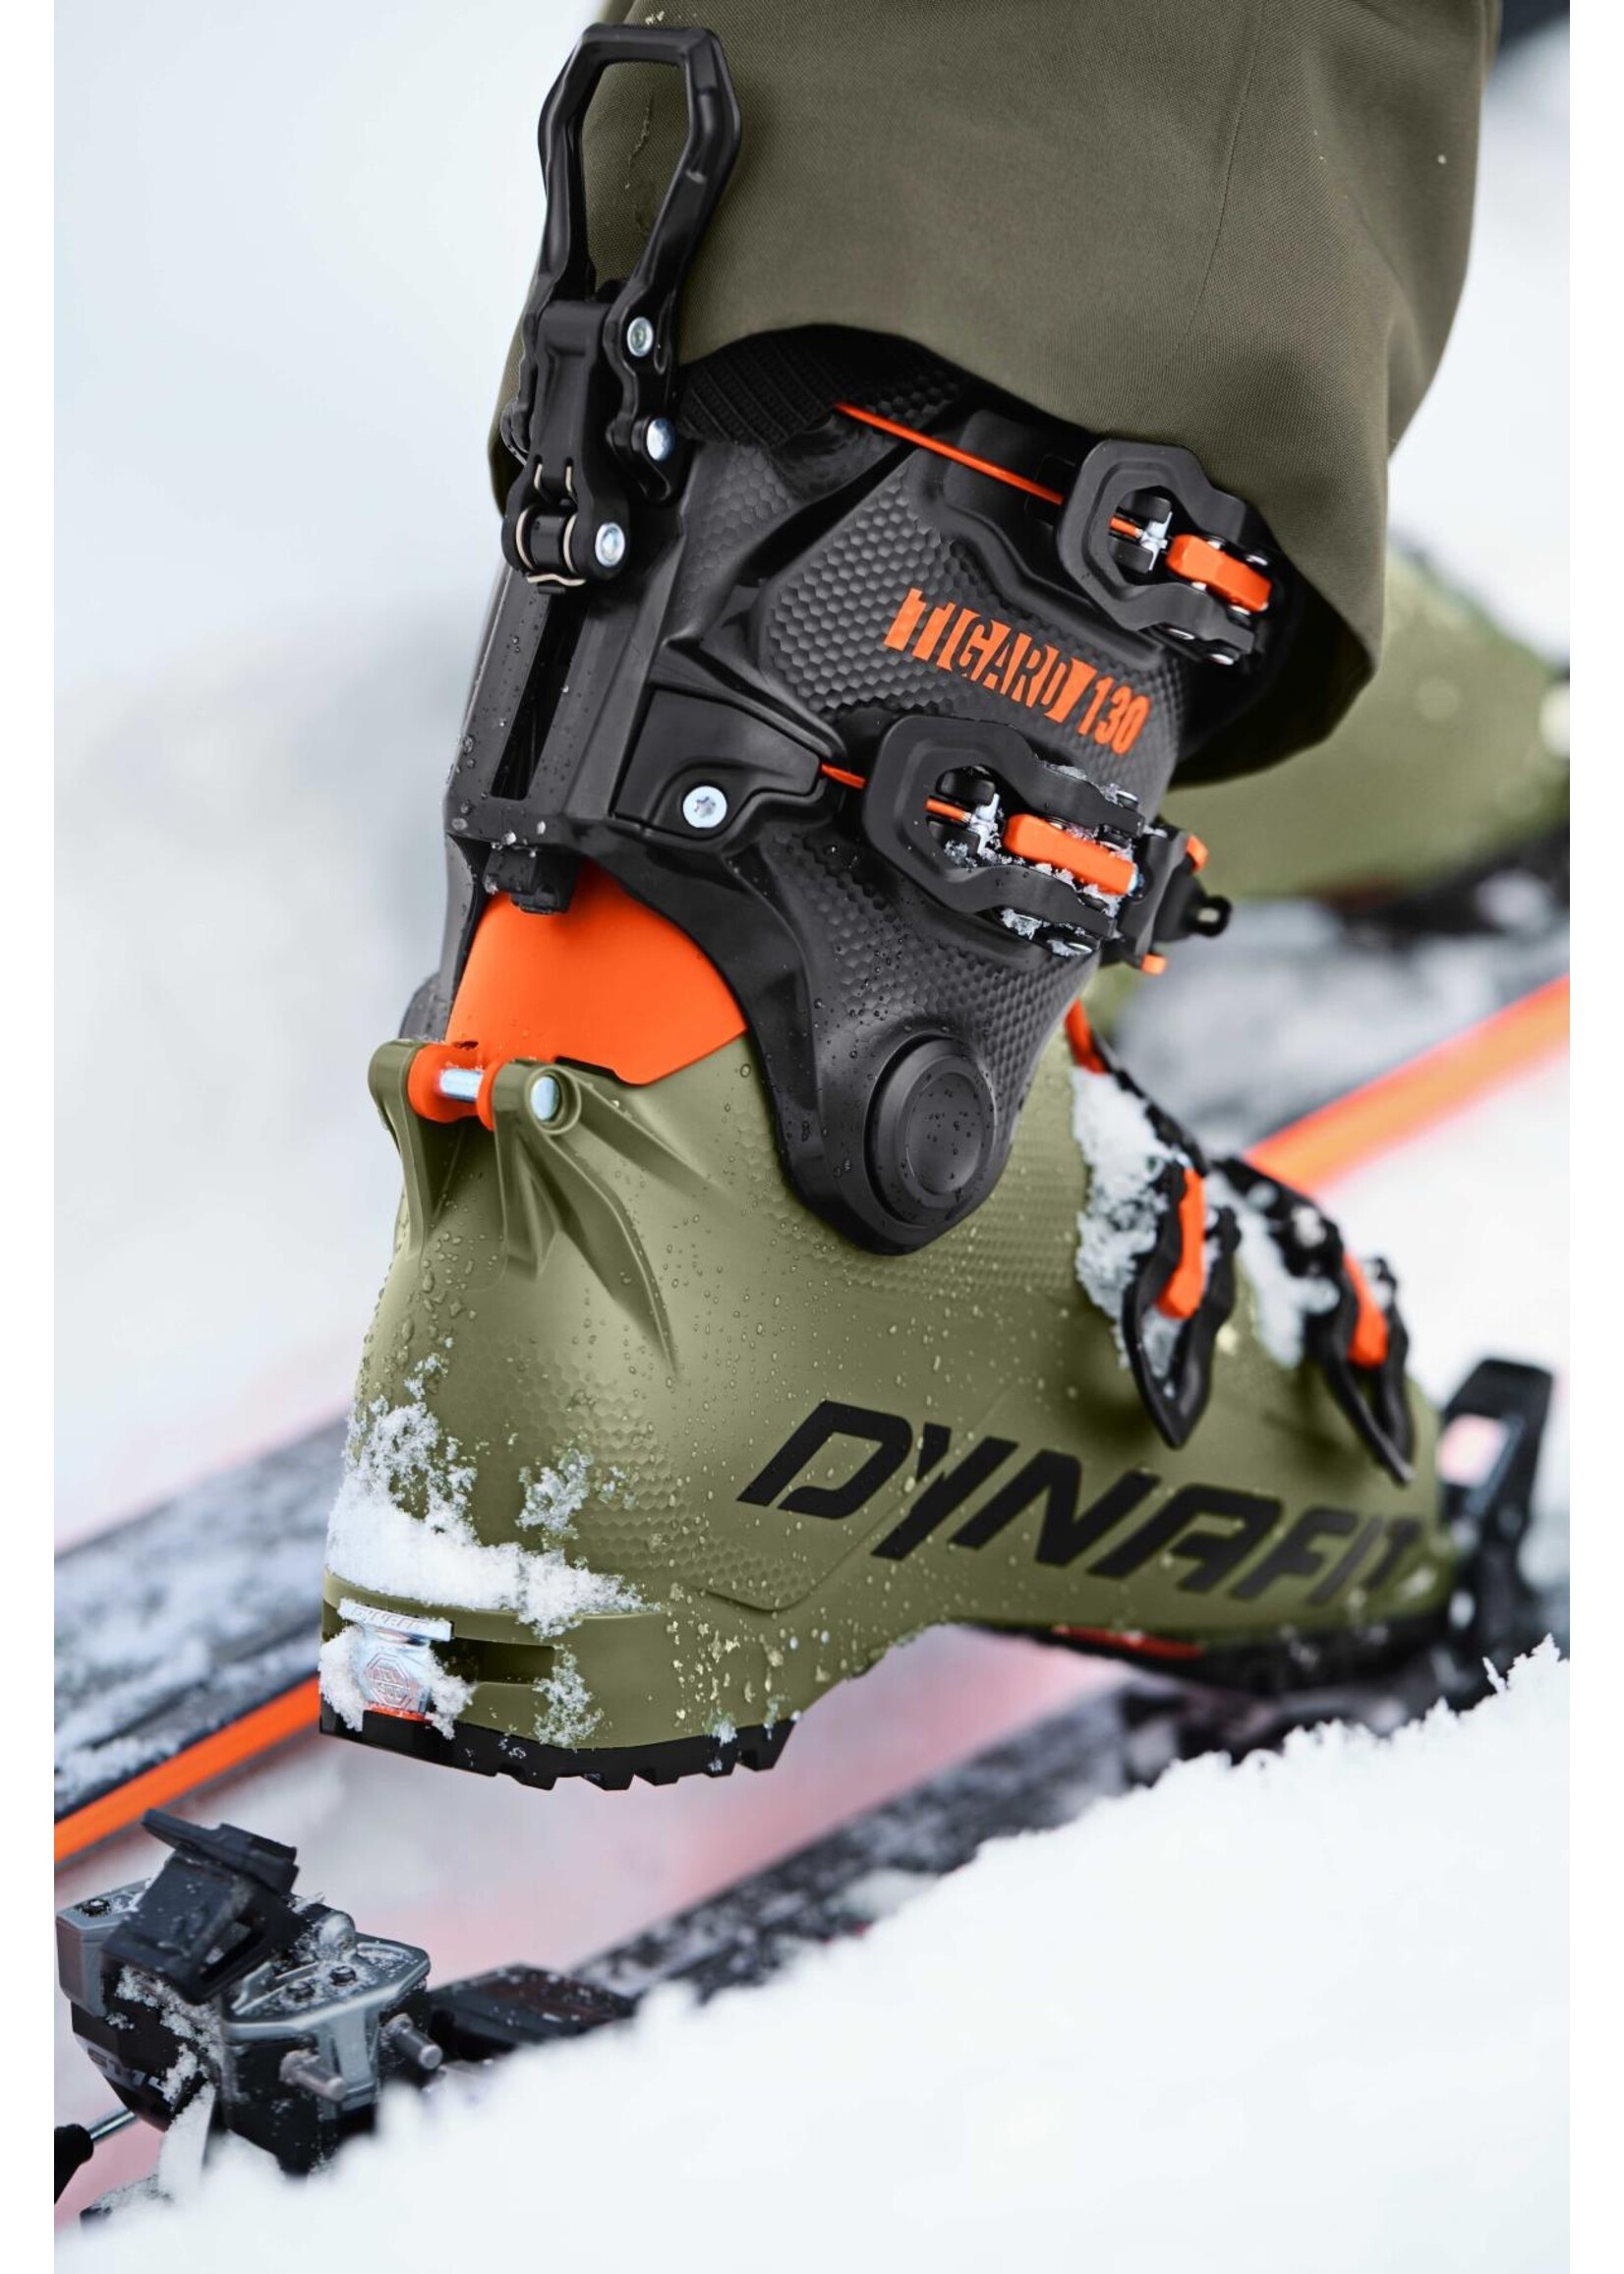 Dynafit Touring Boot Tigard 130